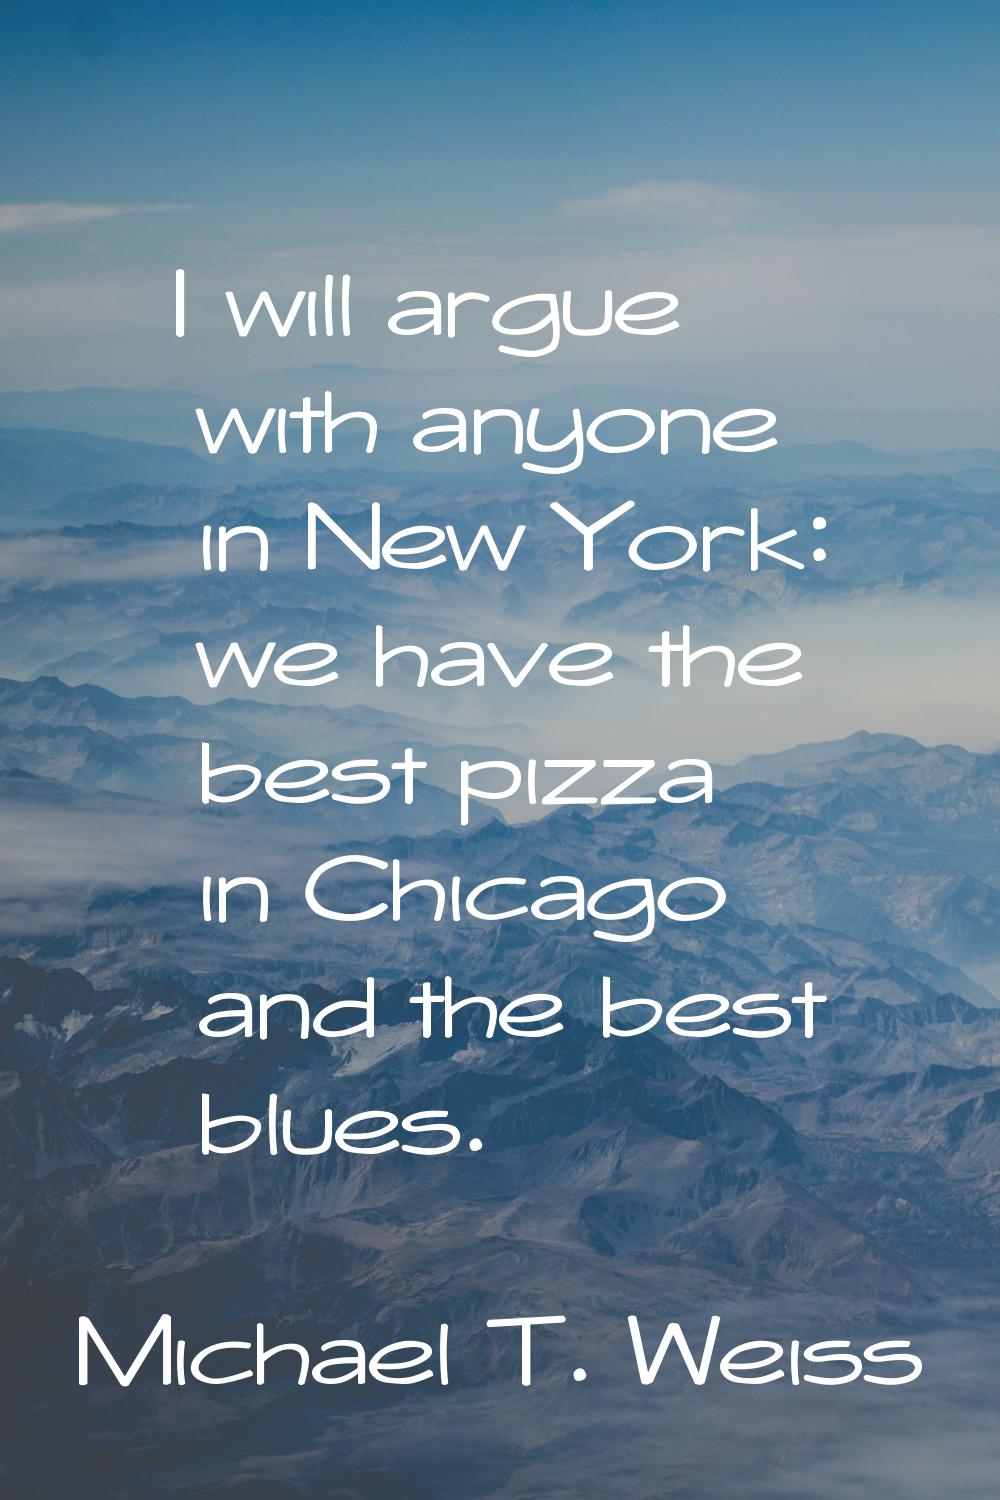 I will argue with anyone in New York: we have the best pizza in Chicago and the best blues.